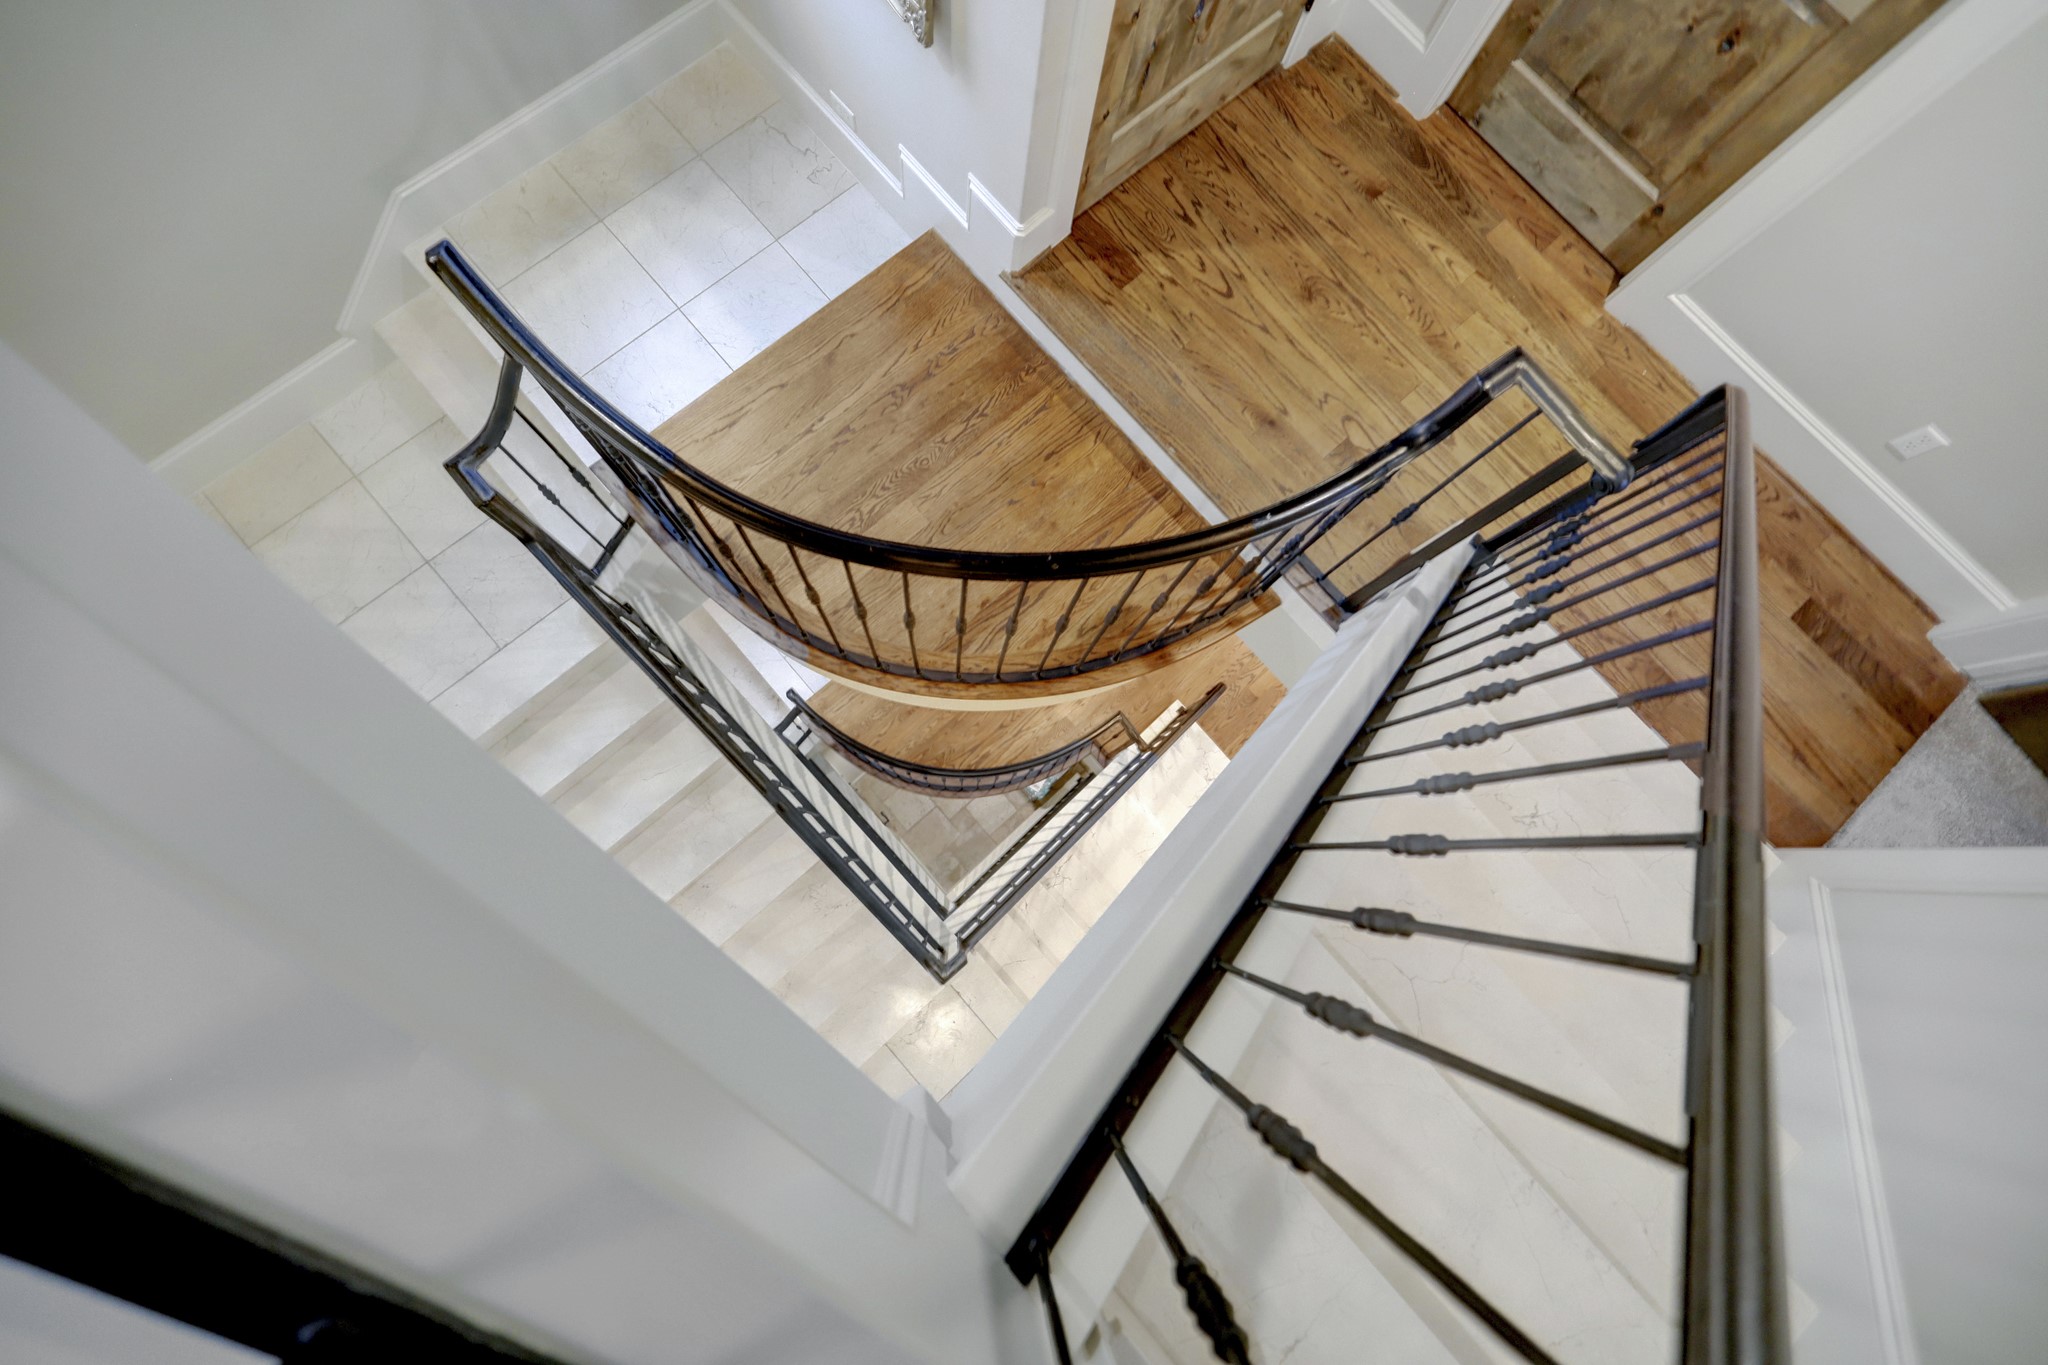 This wow staircase showcases hardwood floors and a rod iron design.